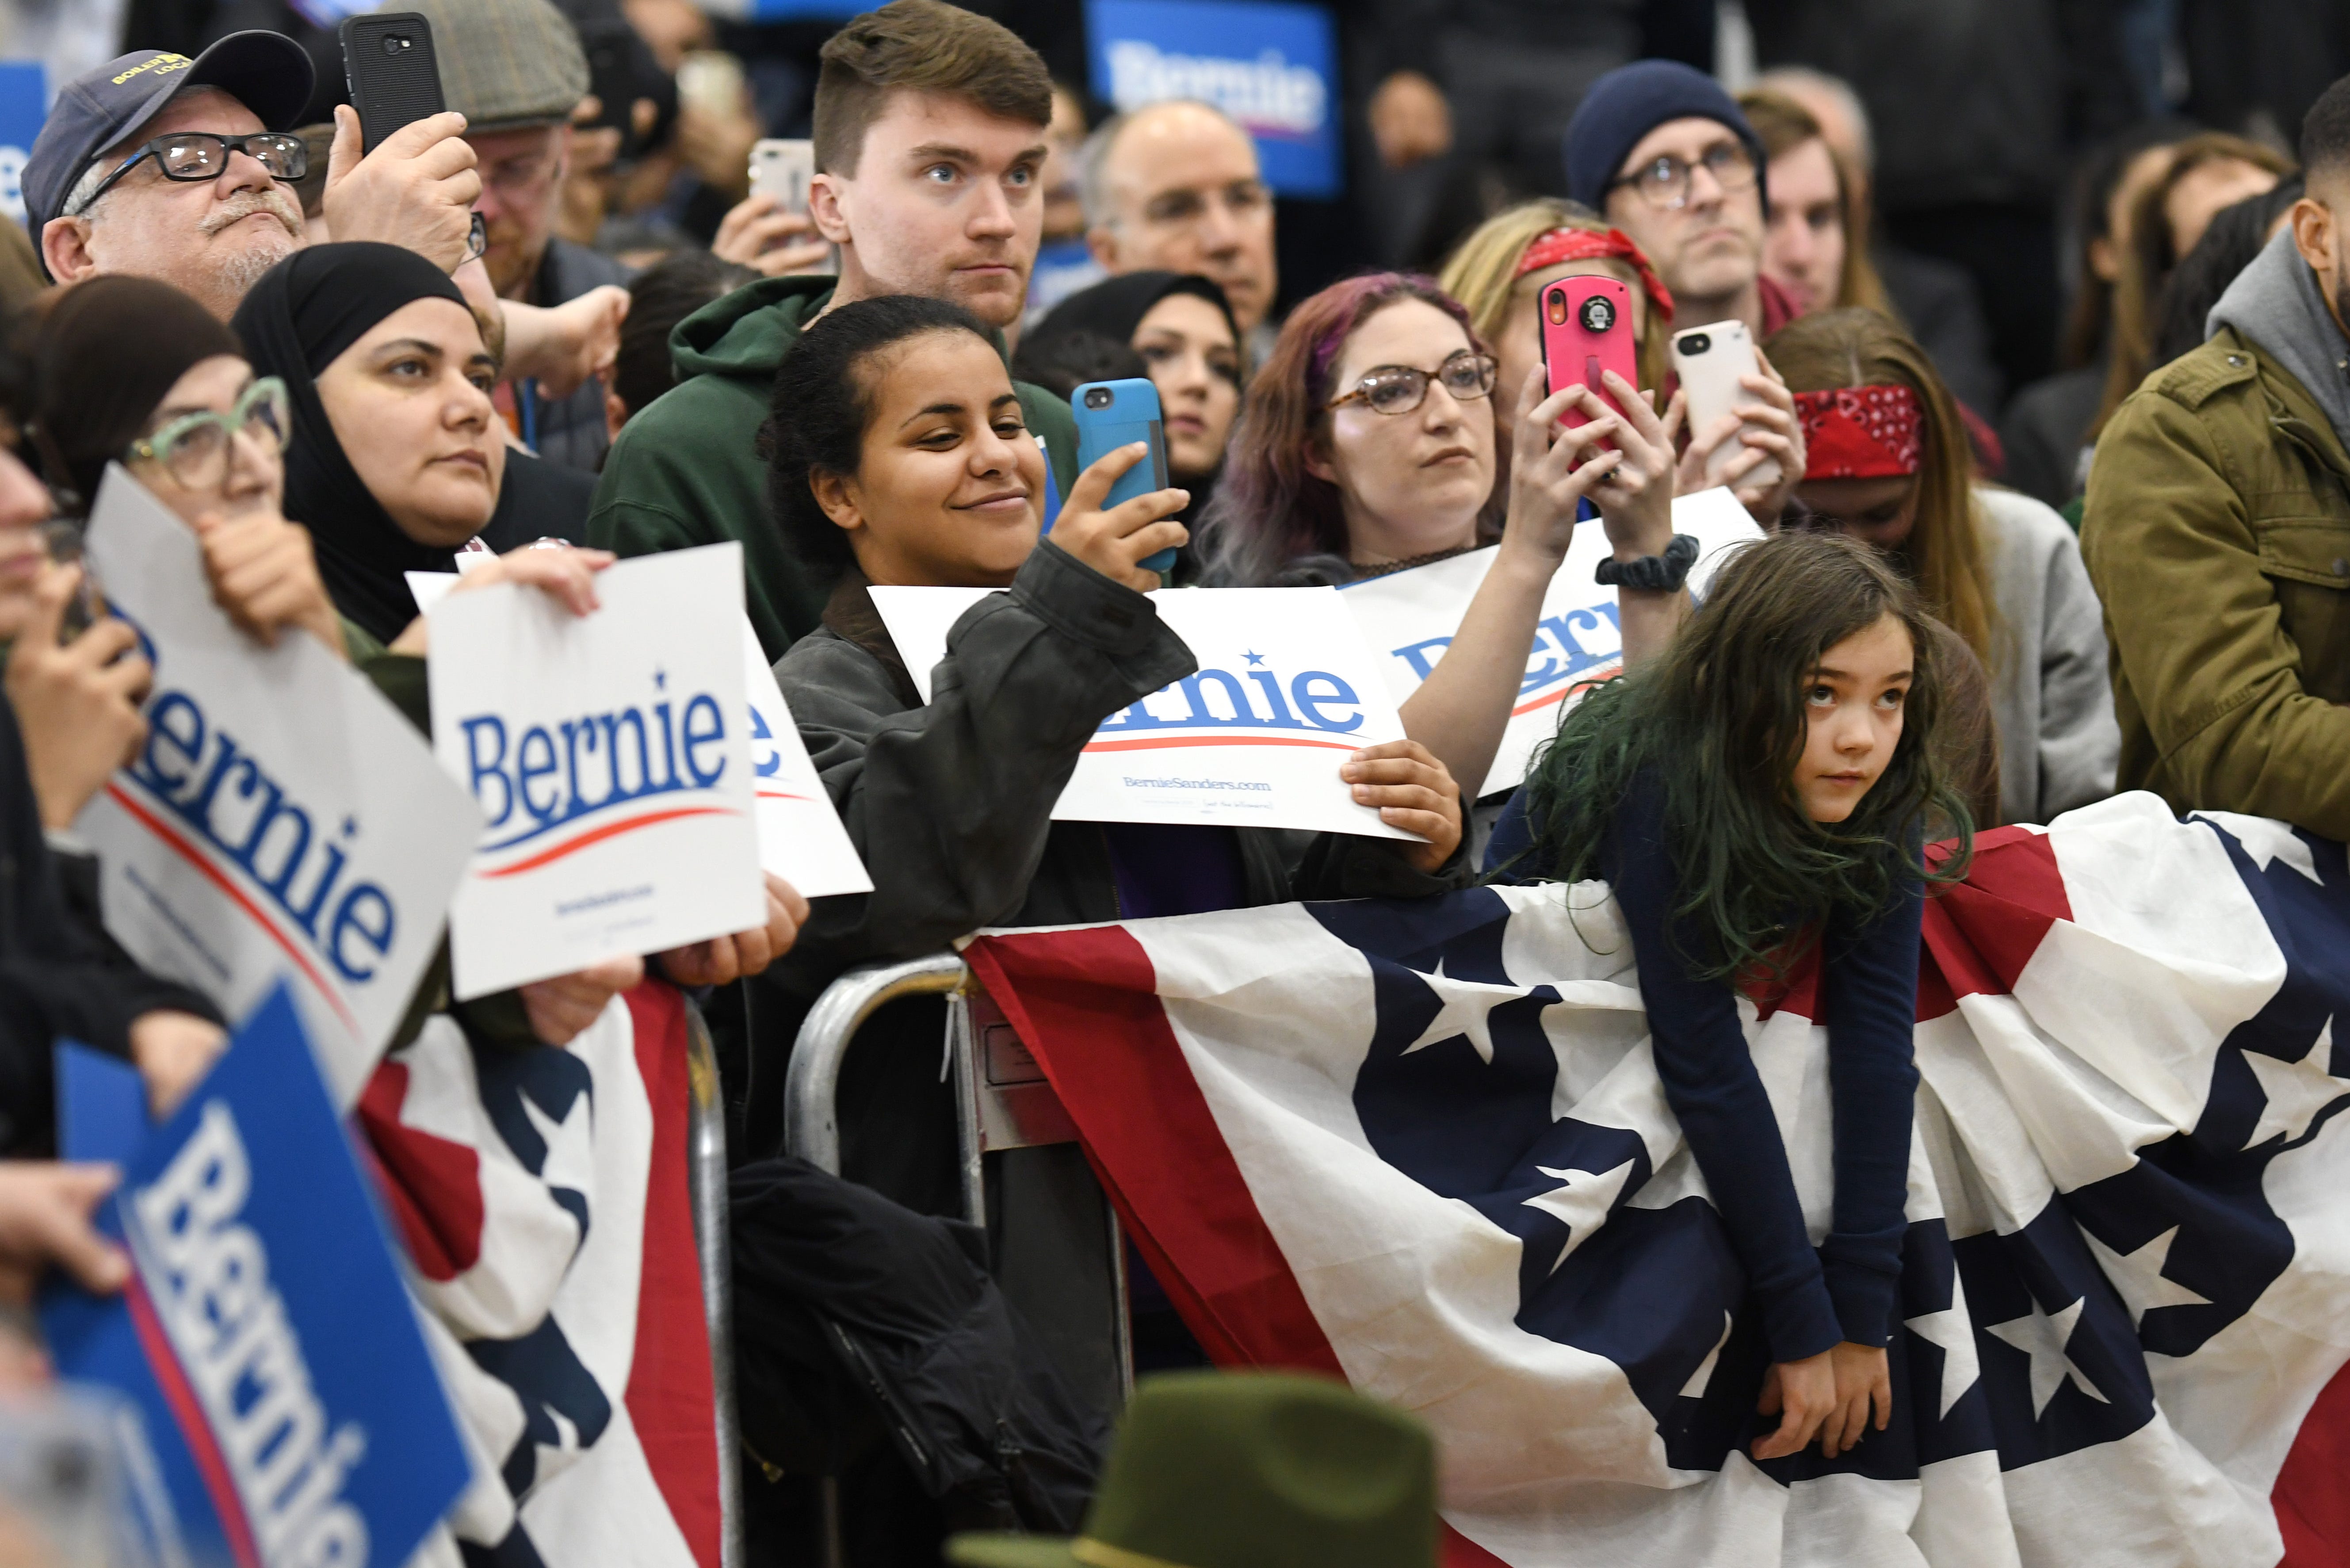 Supporters of presidential candidate Bernie Sanders listen and take photographs during the rally.